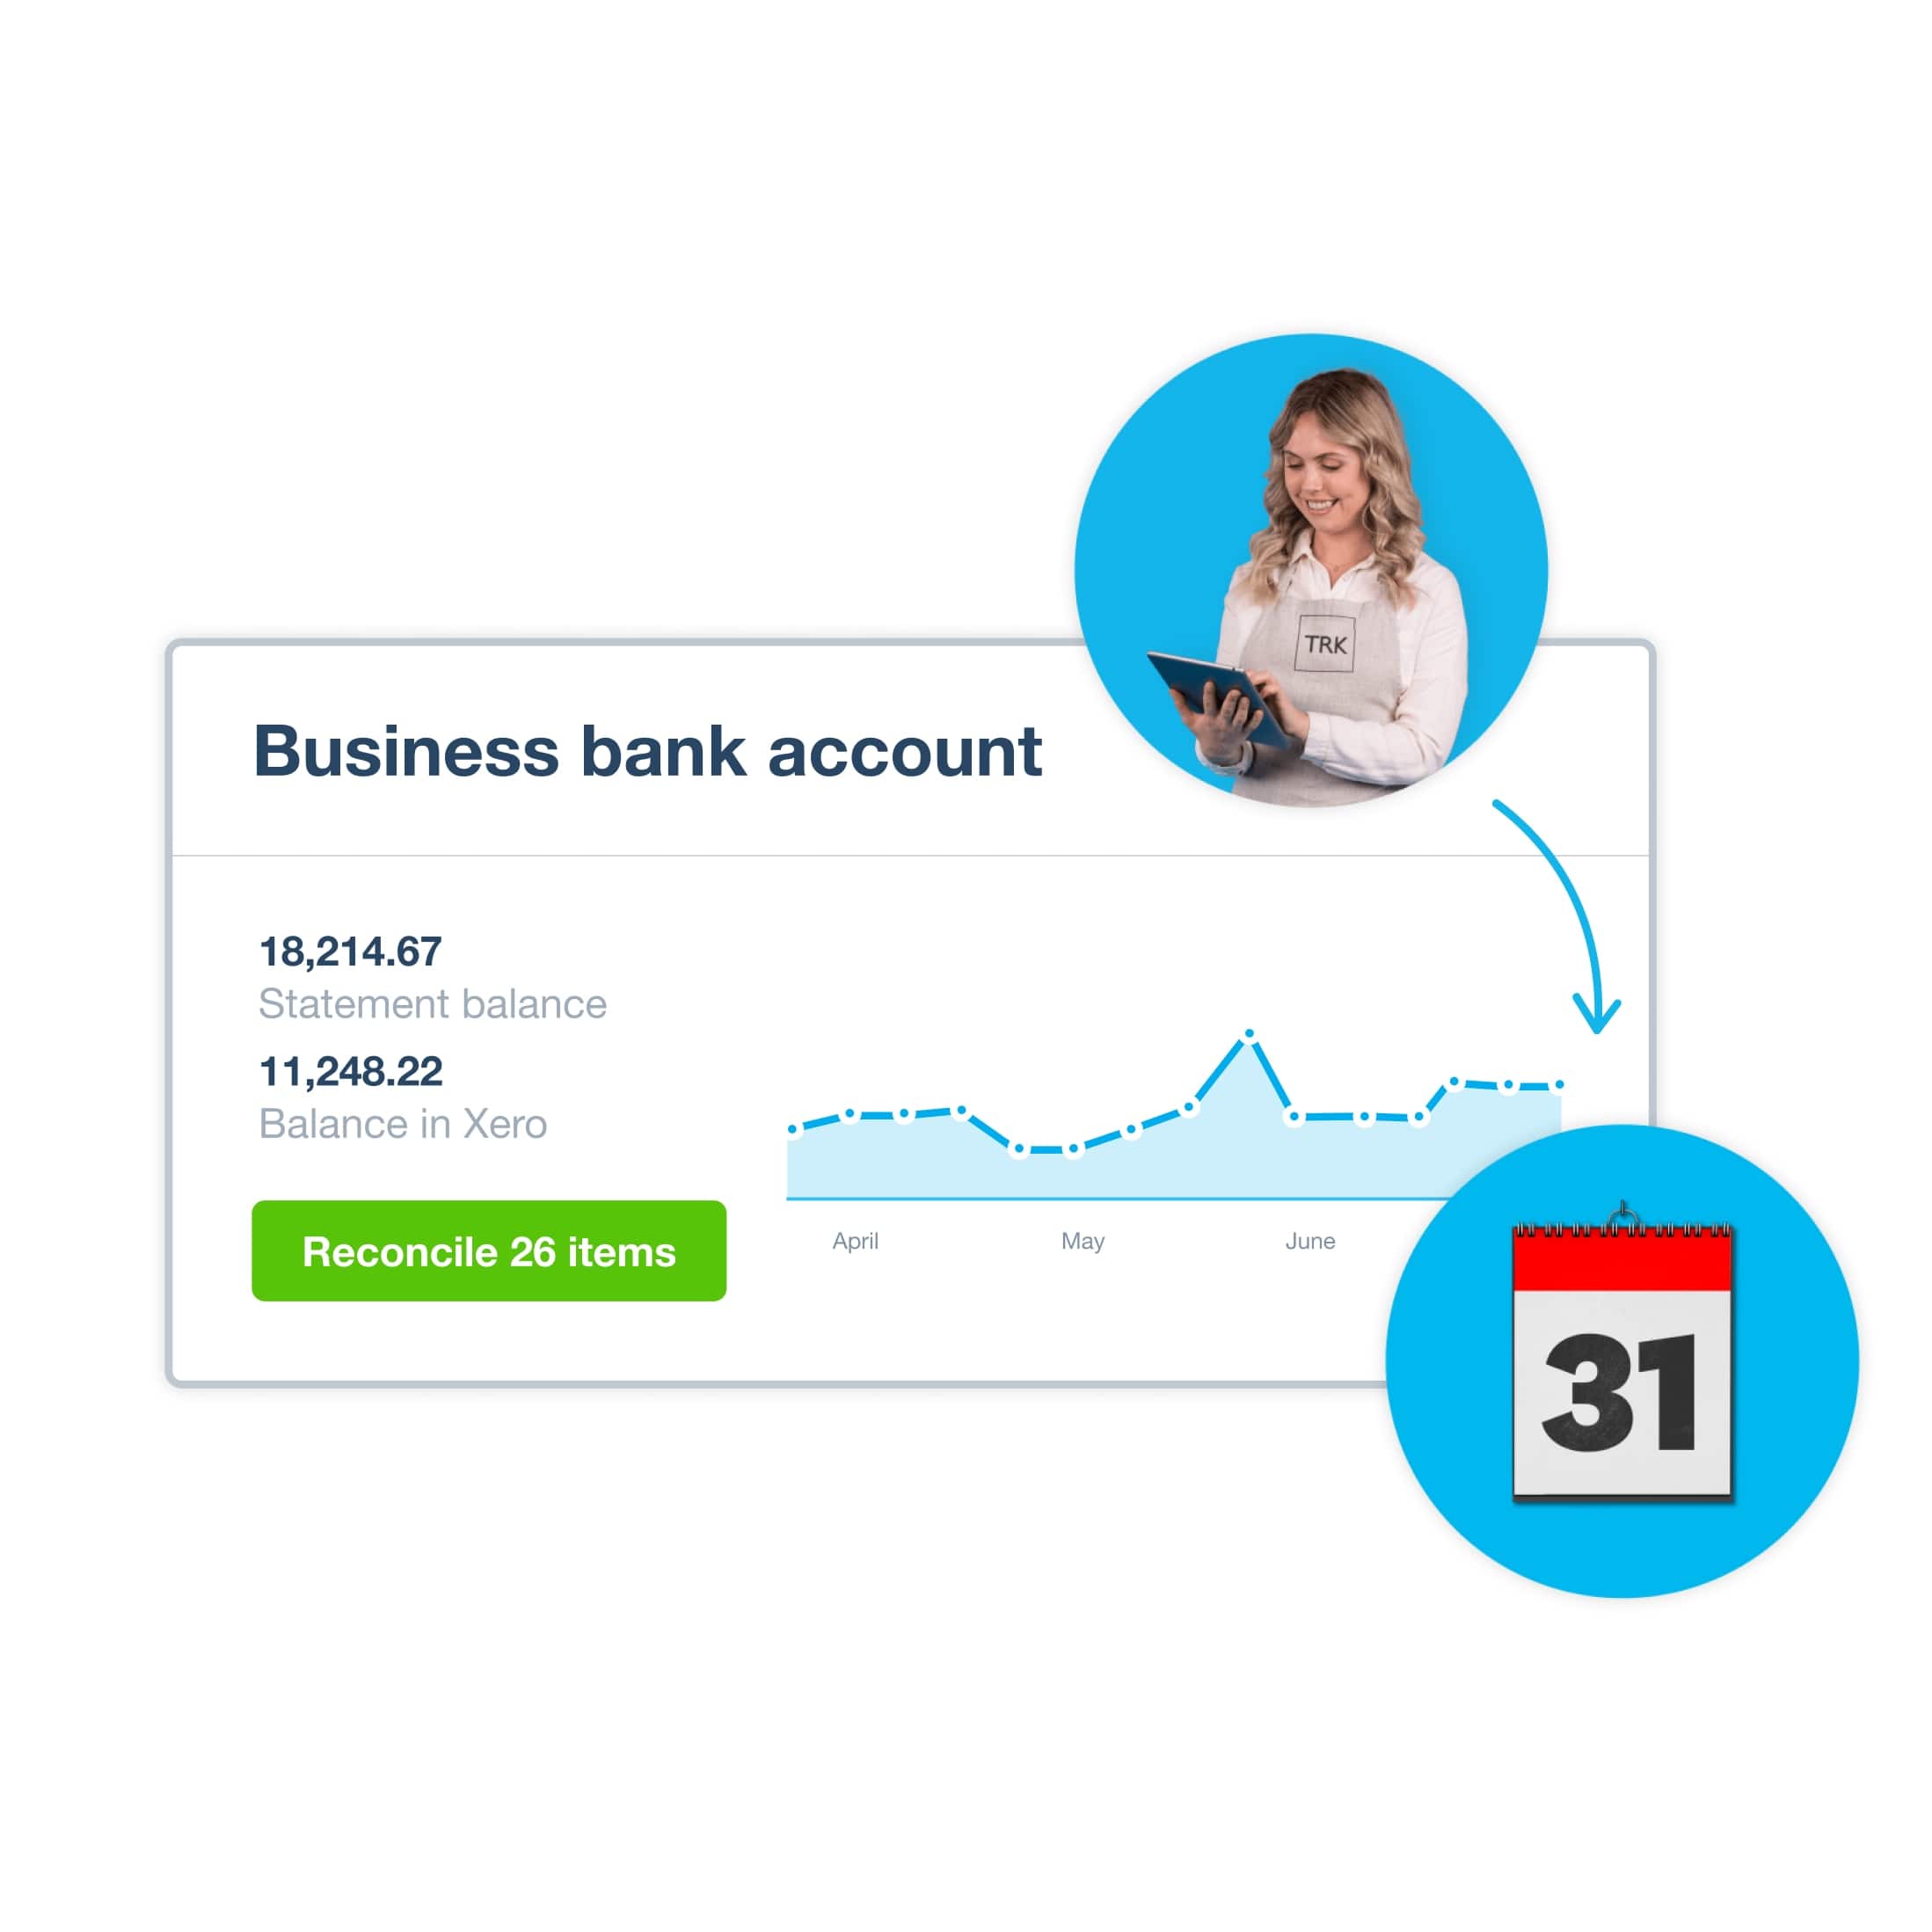 The Xero dashboard shows a graph of running balances for a business bank account, and a button to reconcile transactions. 